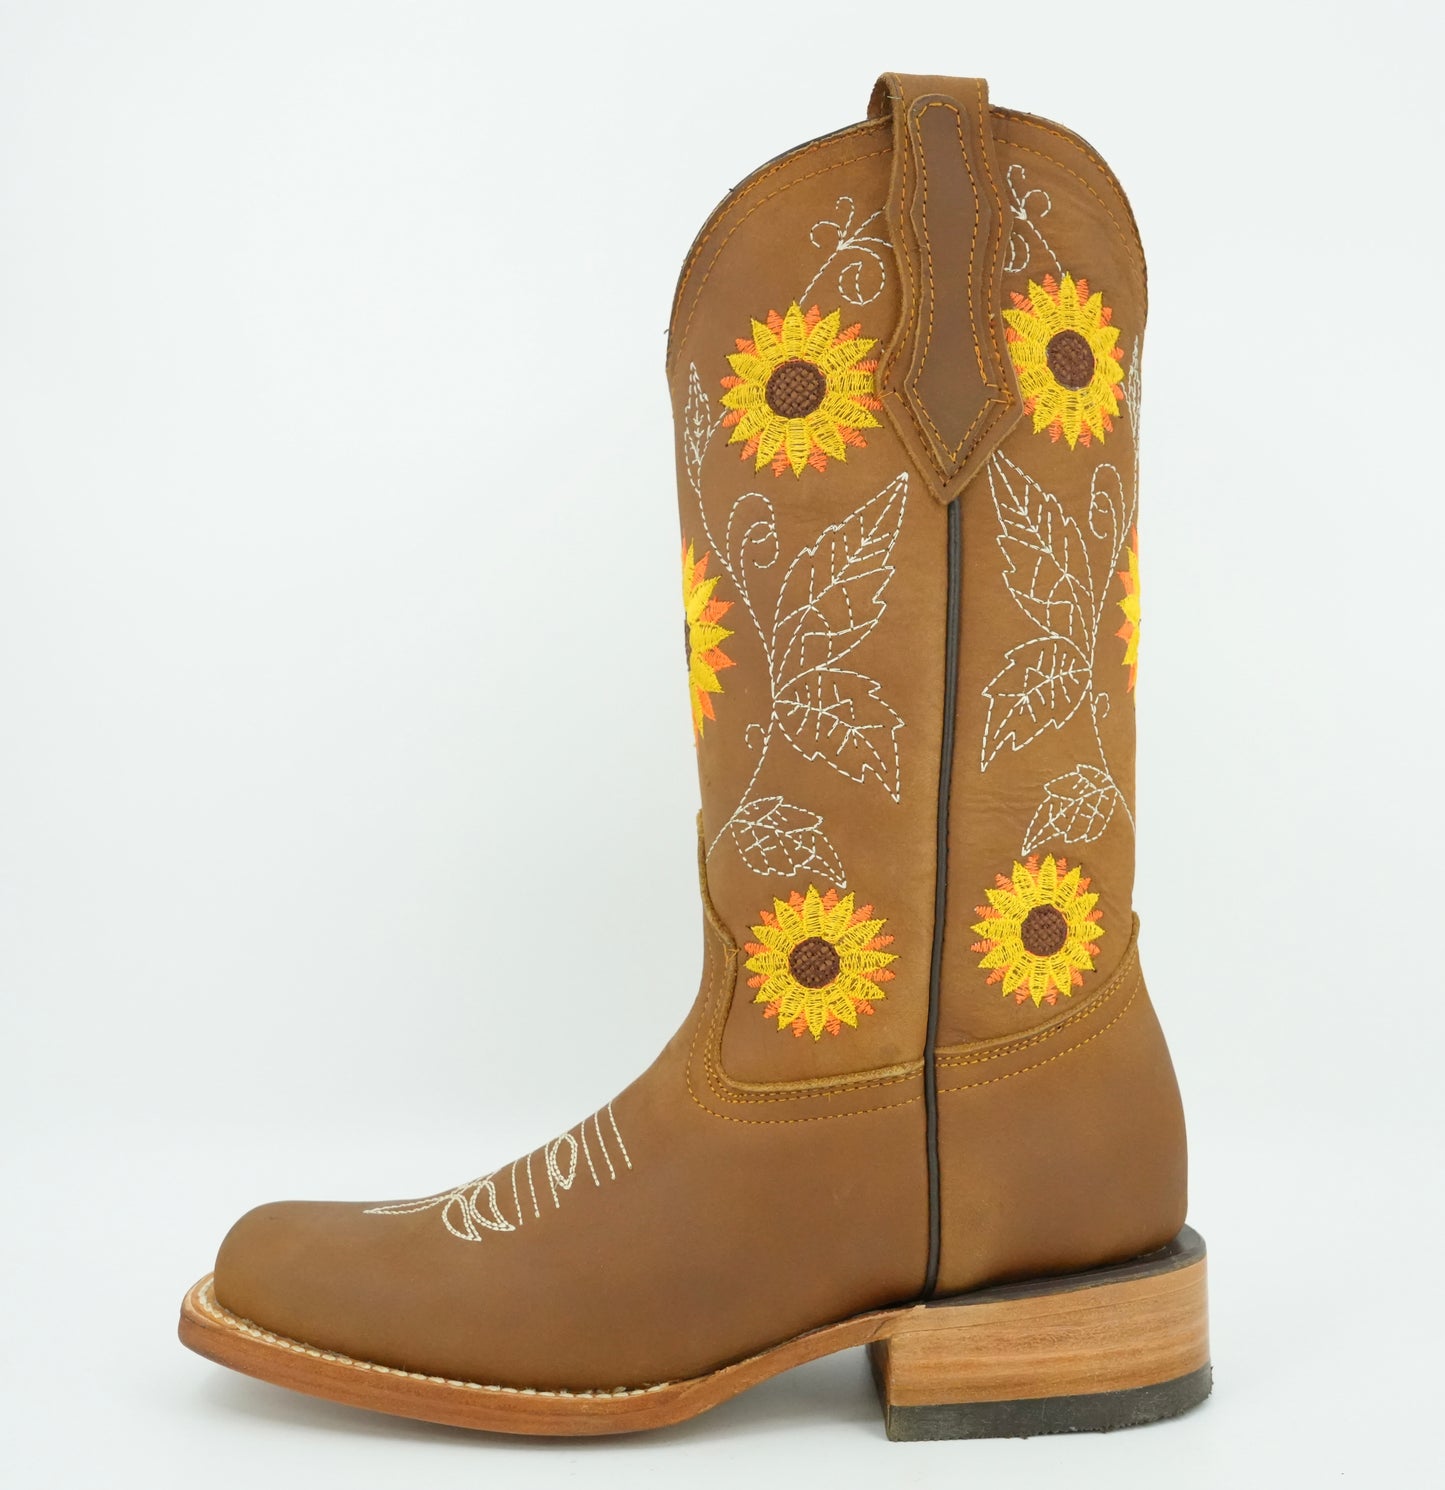 La Sierra Women's Tang Embroidered Sunflowers Square Toe Boot